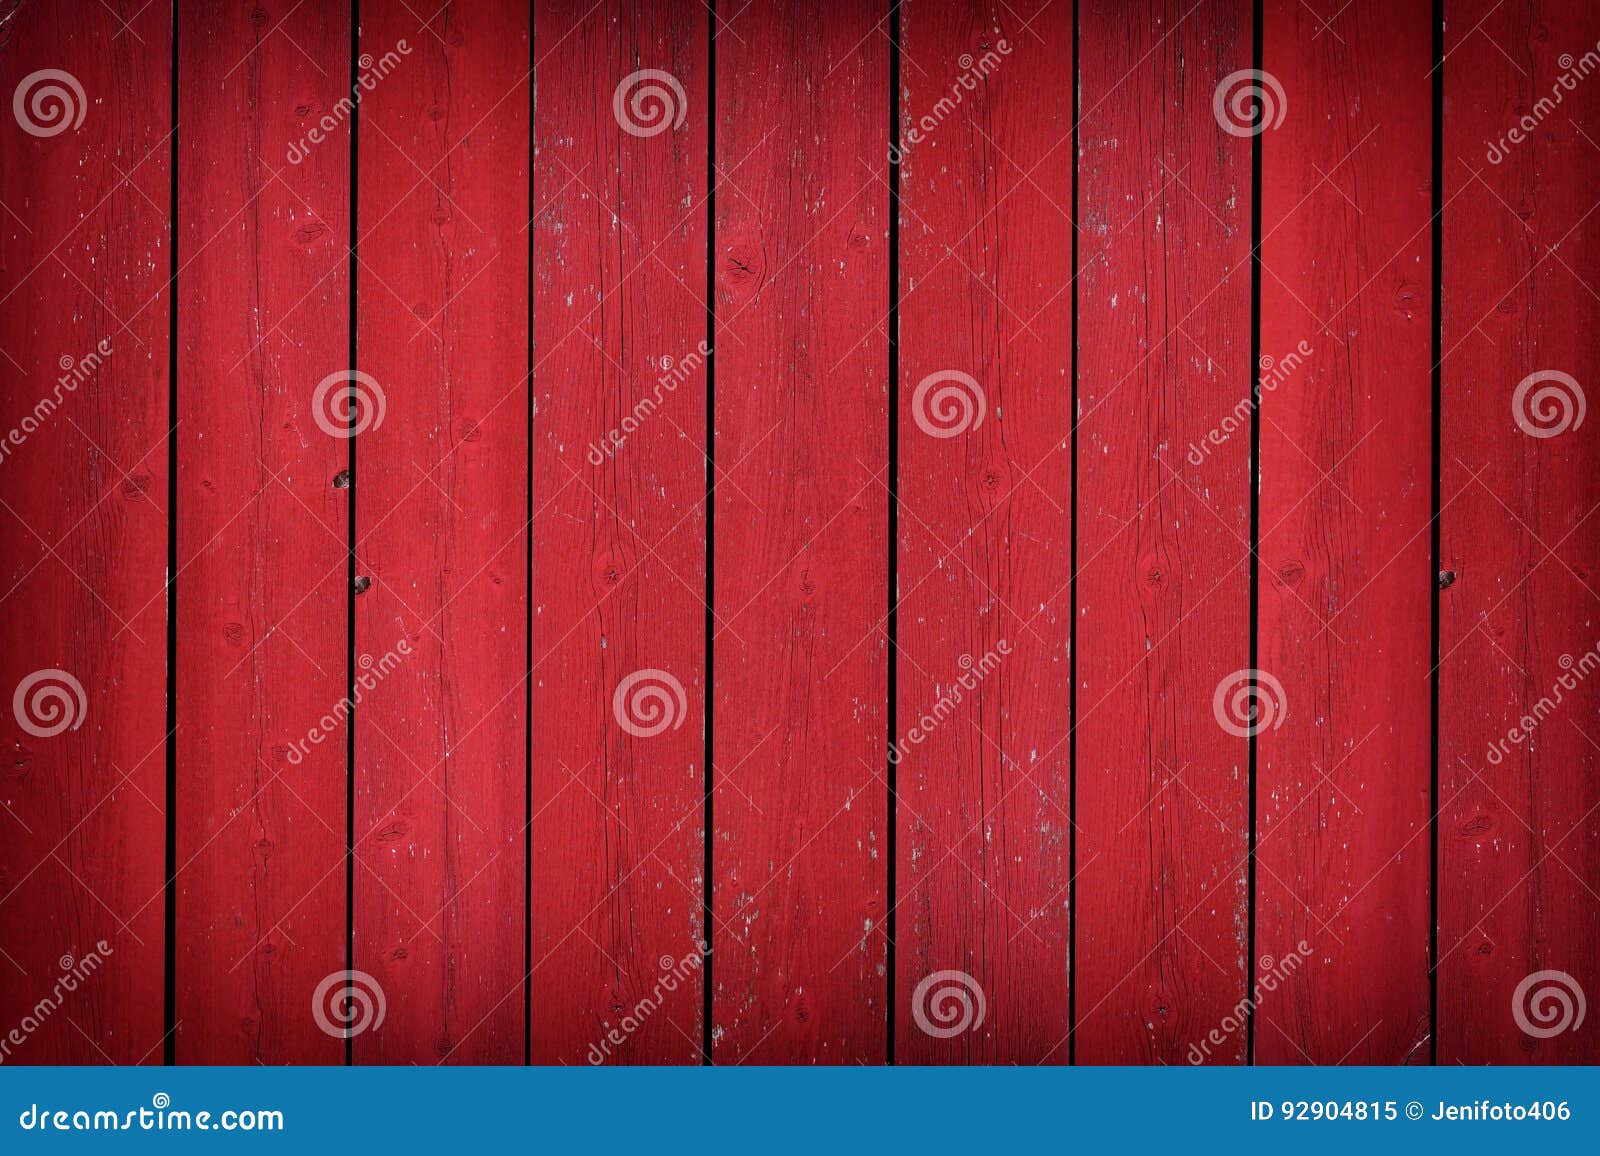 rustic old red wood plank background with vignette